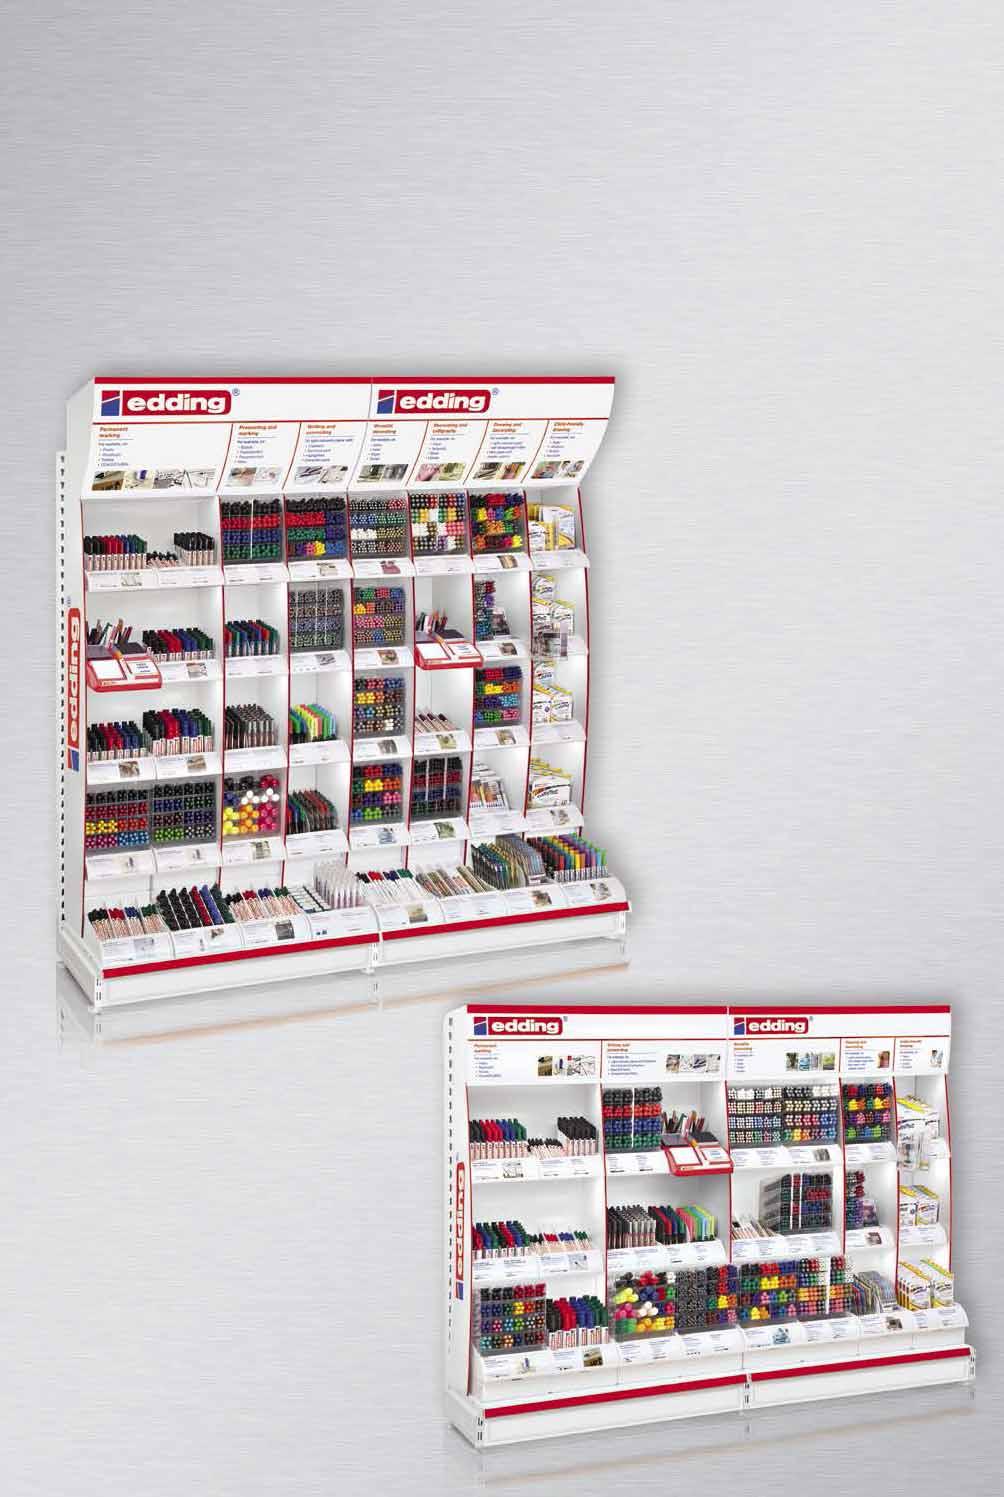 edding POS Shop The edding POS Shop is available in an eye-catching wall placement and aisle solution.